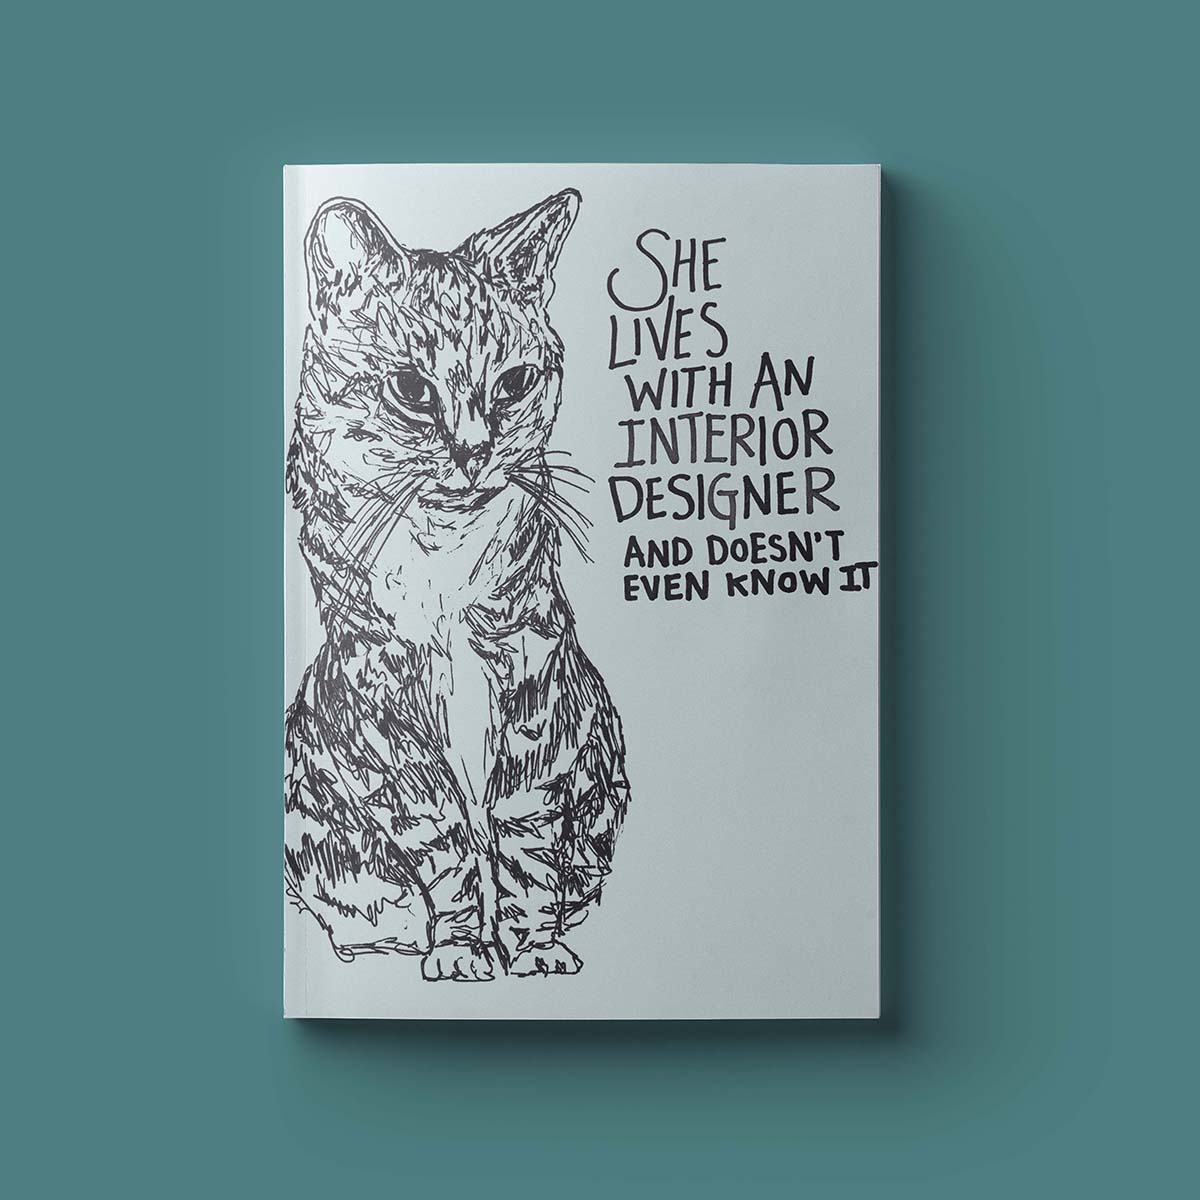 The cover of Contradiction Zine featuring an illustration of a cat